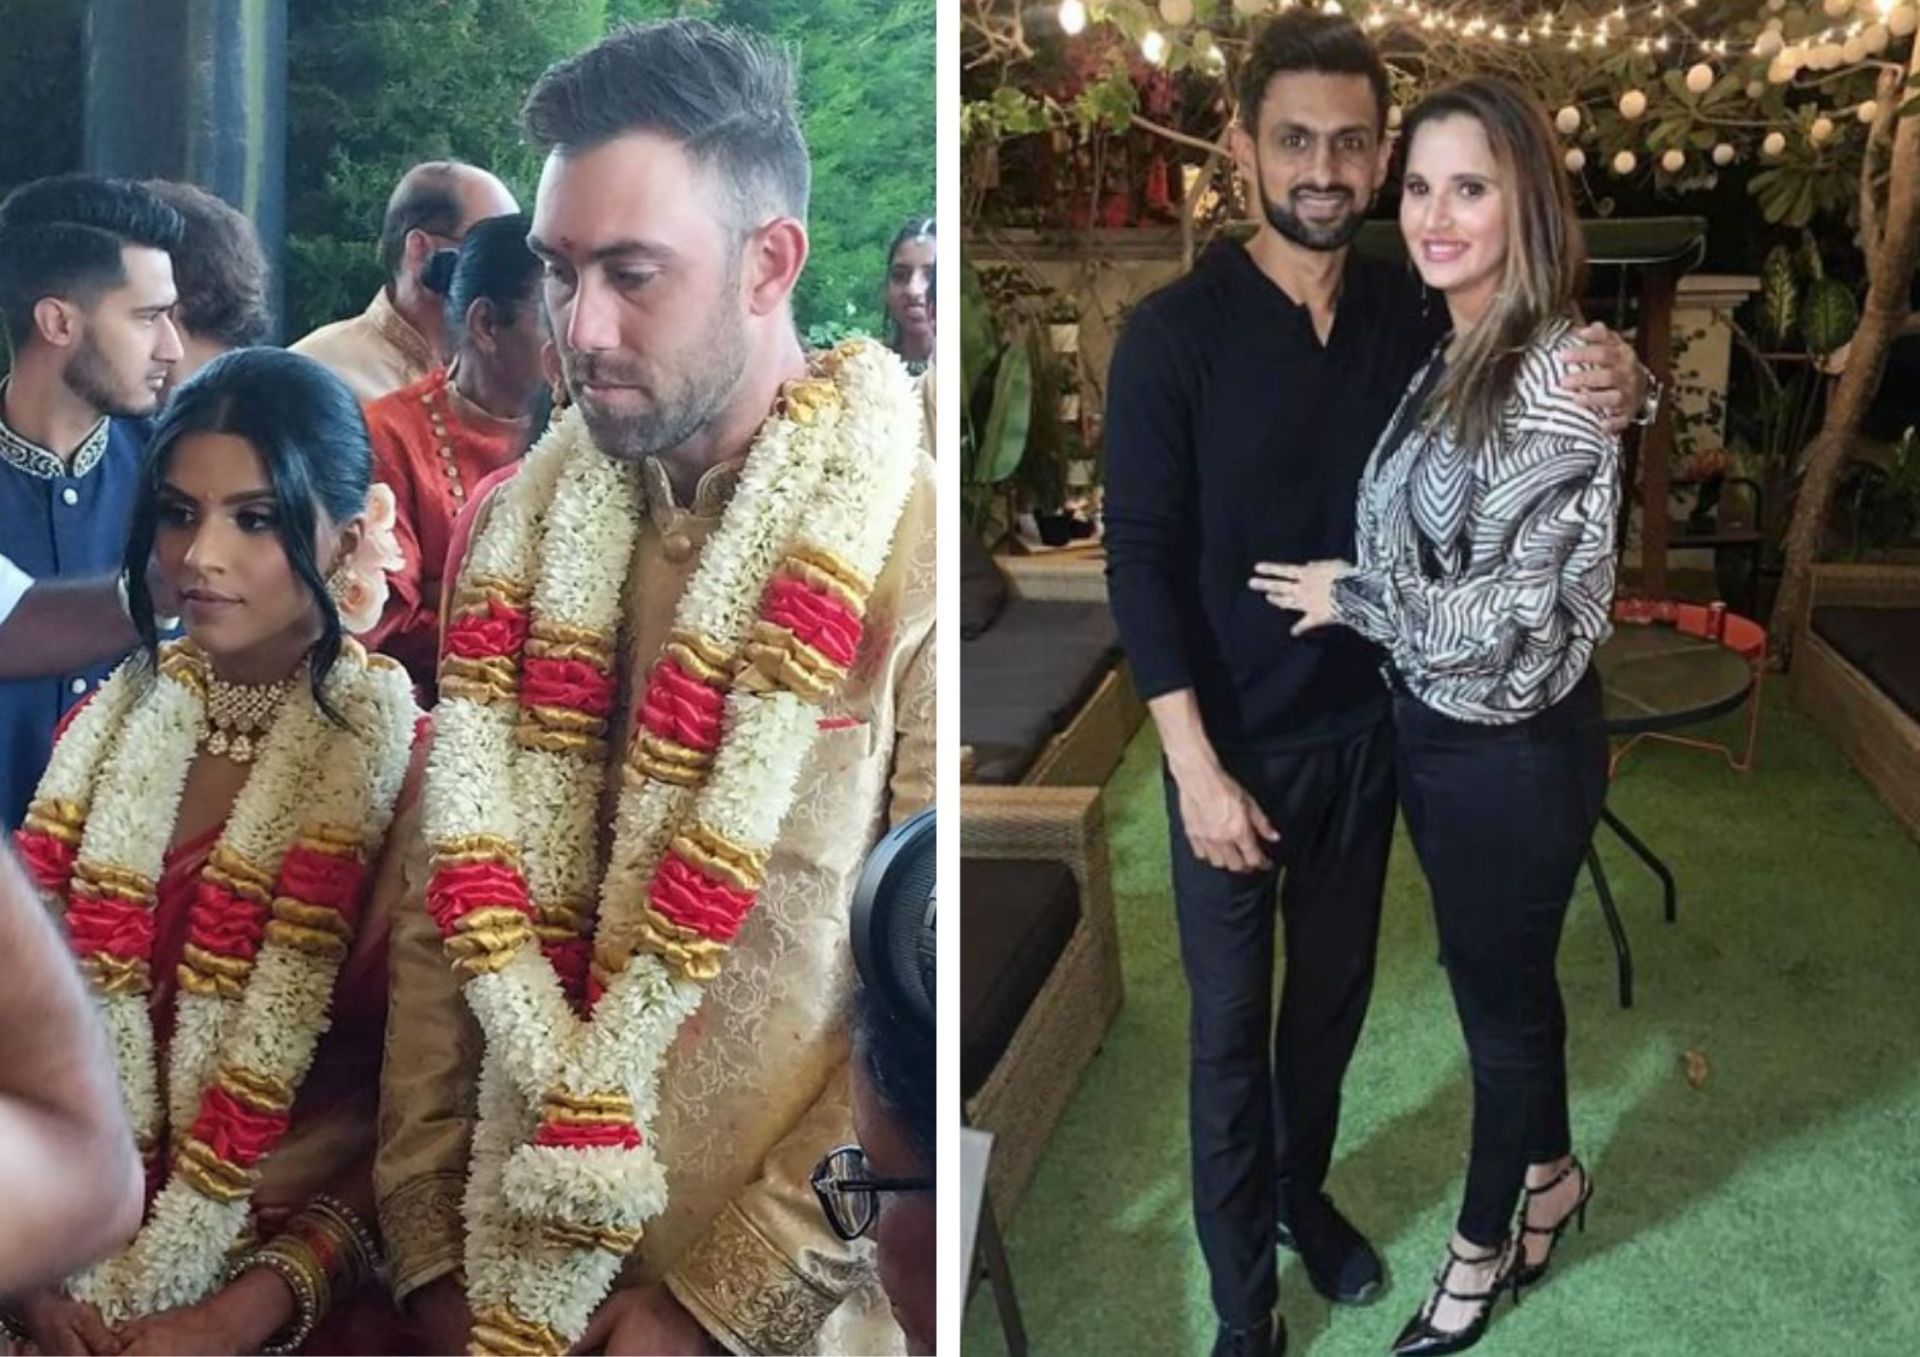 Glenn Maxwell tied the knot earlier this year while Shoaib Malik and Sania Mirza have been married for 12 years. (Picture Credits: Twitter; Instagram/Shoaib Malik).